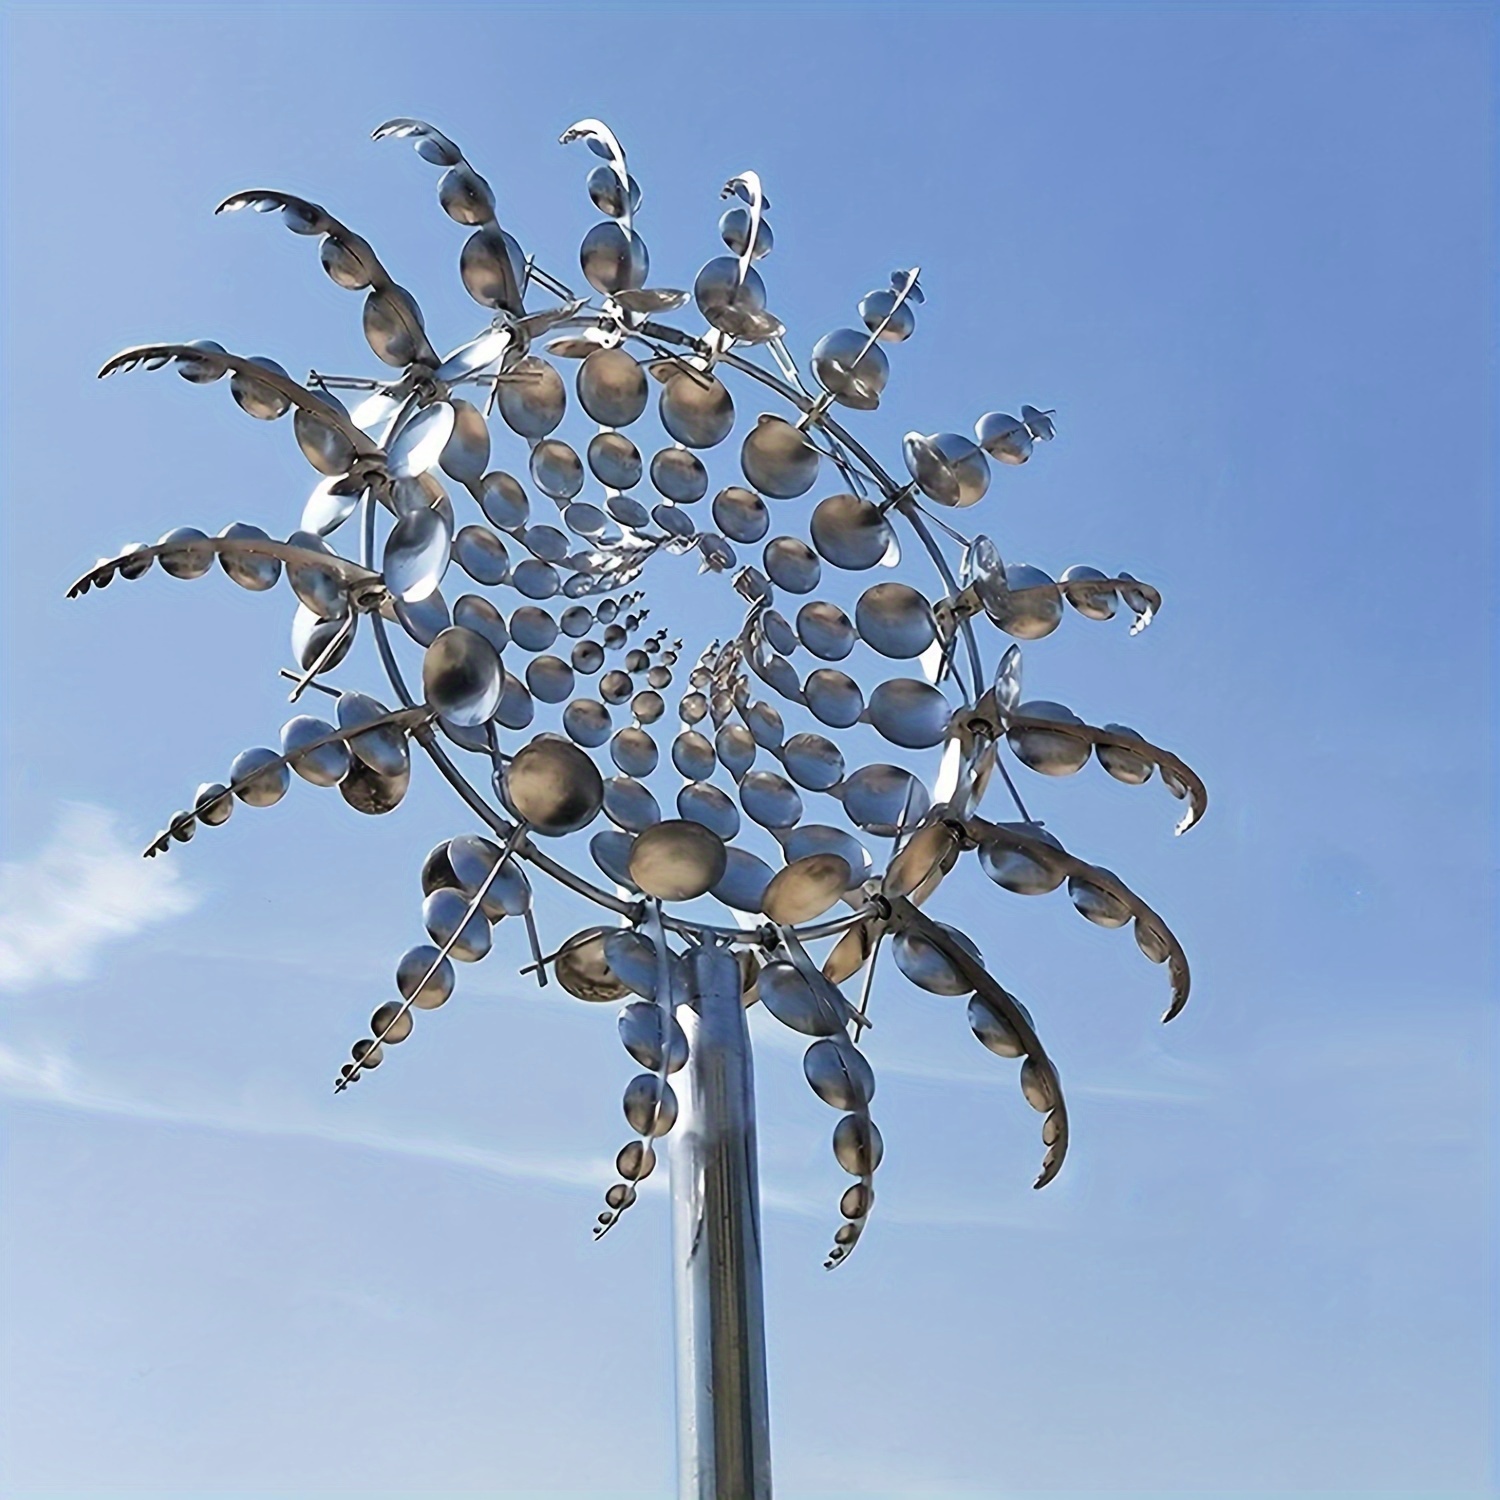 

Enchanting Metal Windmill - 3d Kinetic Sculpture, Wind Catcher For Outdoor Garden Decor - Perfect For Halloween, Christmas, Easter, Thanksgiving